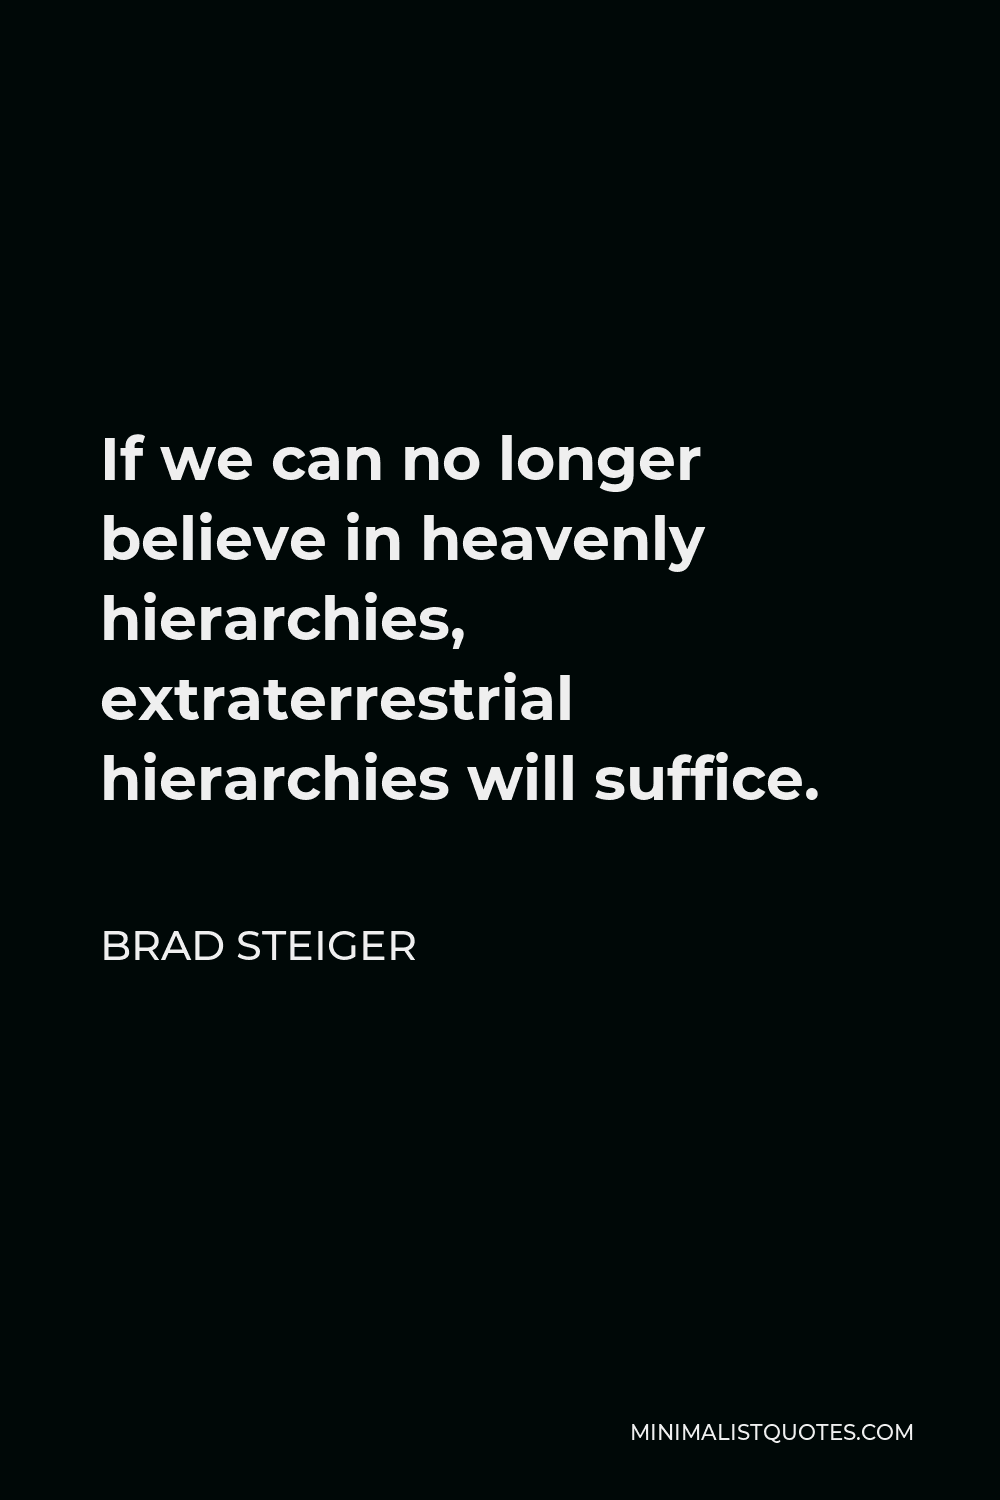 Brad Steiger Quote - If we can no longer believe in heavenly hierarchies, extraterrestrial hierarchies will suffice.